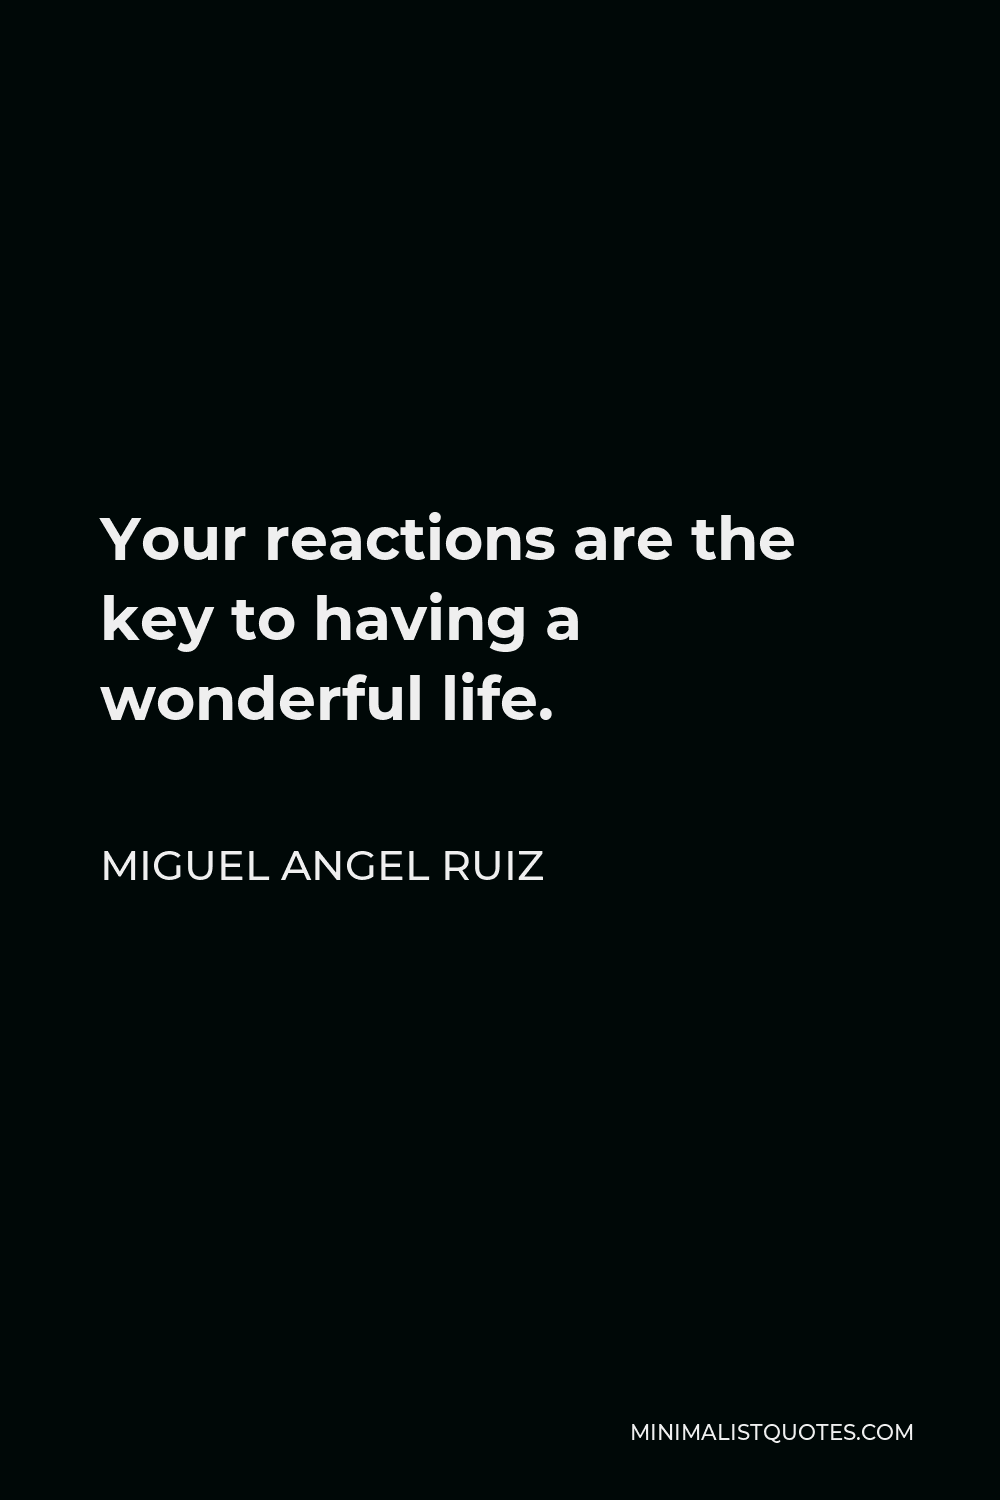 Miguel Angel Ruiz Quote - Your reactions are the key to having a wonderful life.